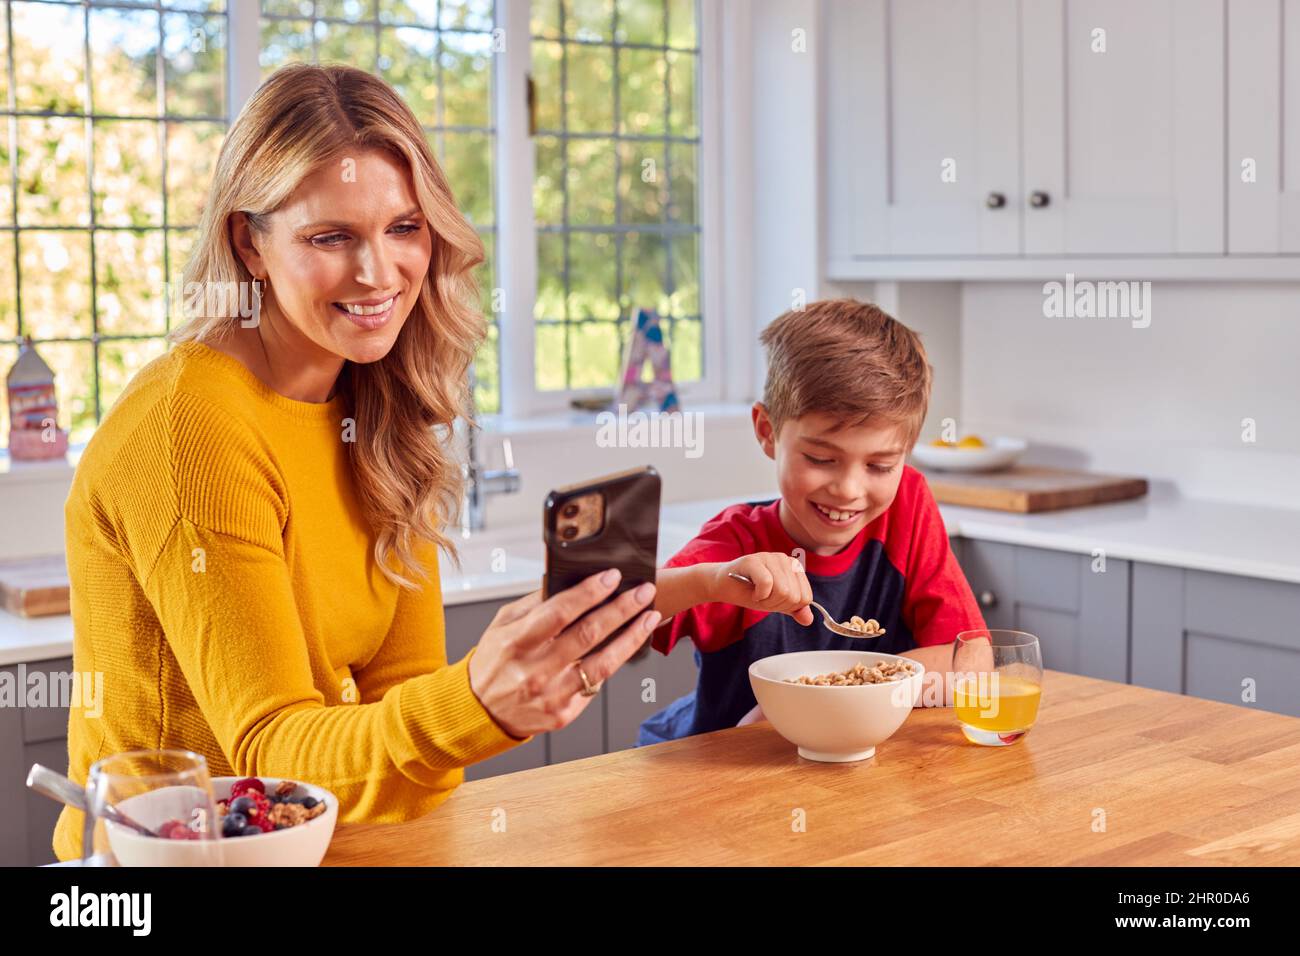 Son At Home Eating Breakfast Cereal At Kitchen Counter As Mother Looks At Mobile Phone Stock Photo